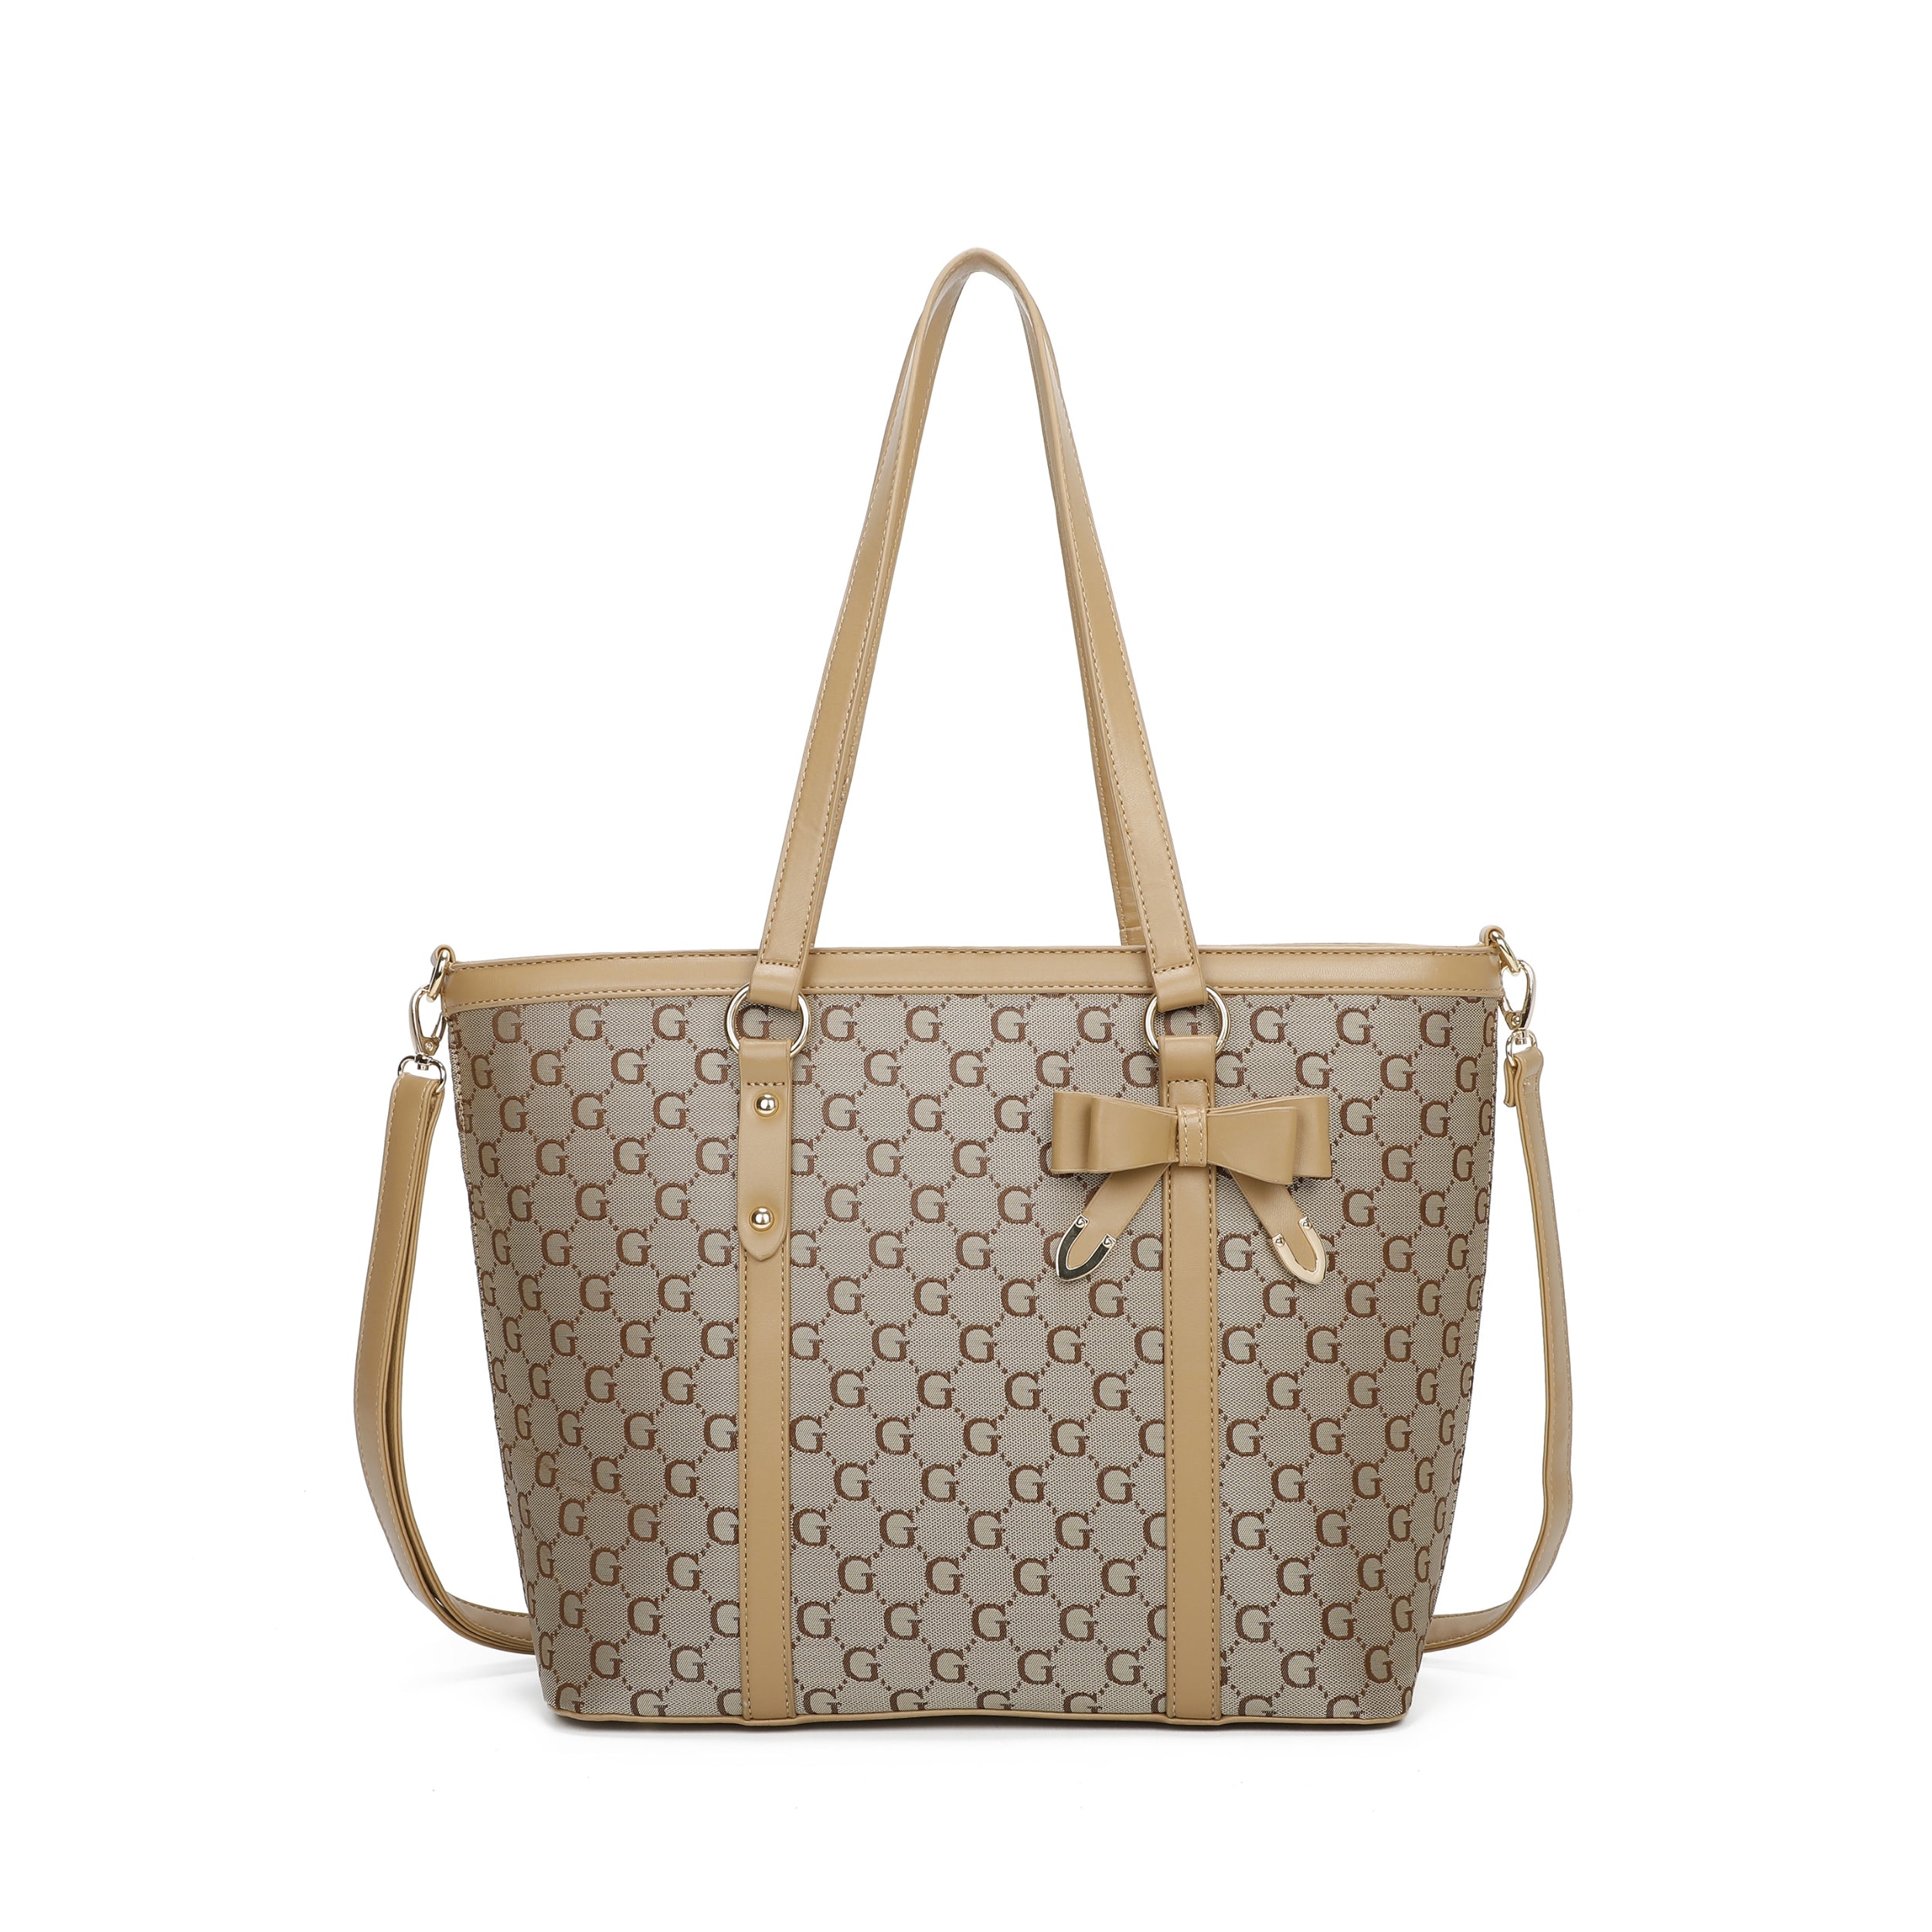 Craze London Fully lined interior Tote Bag